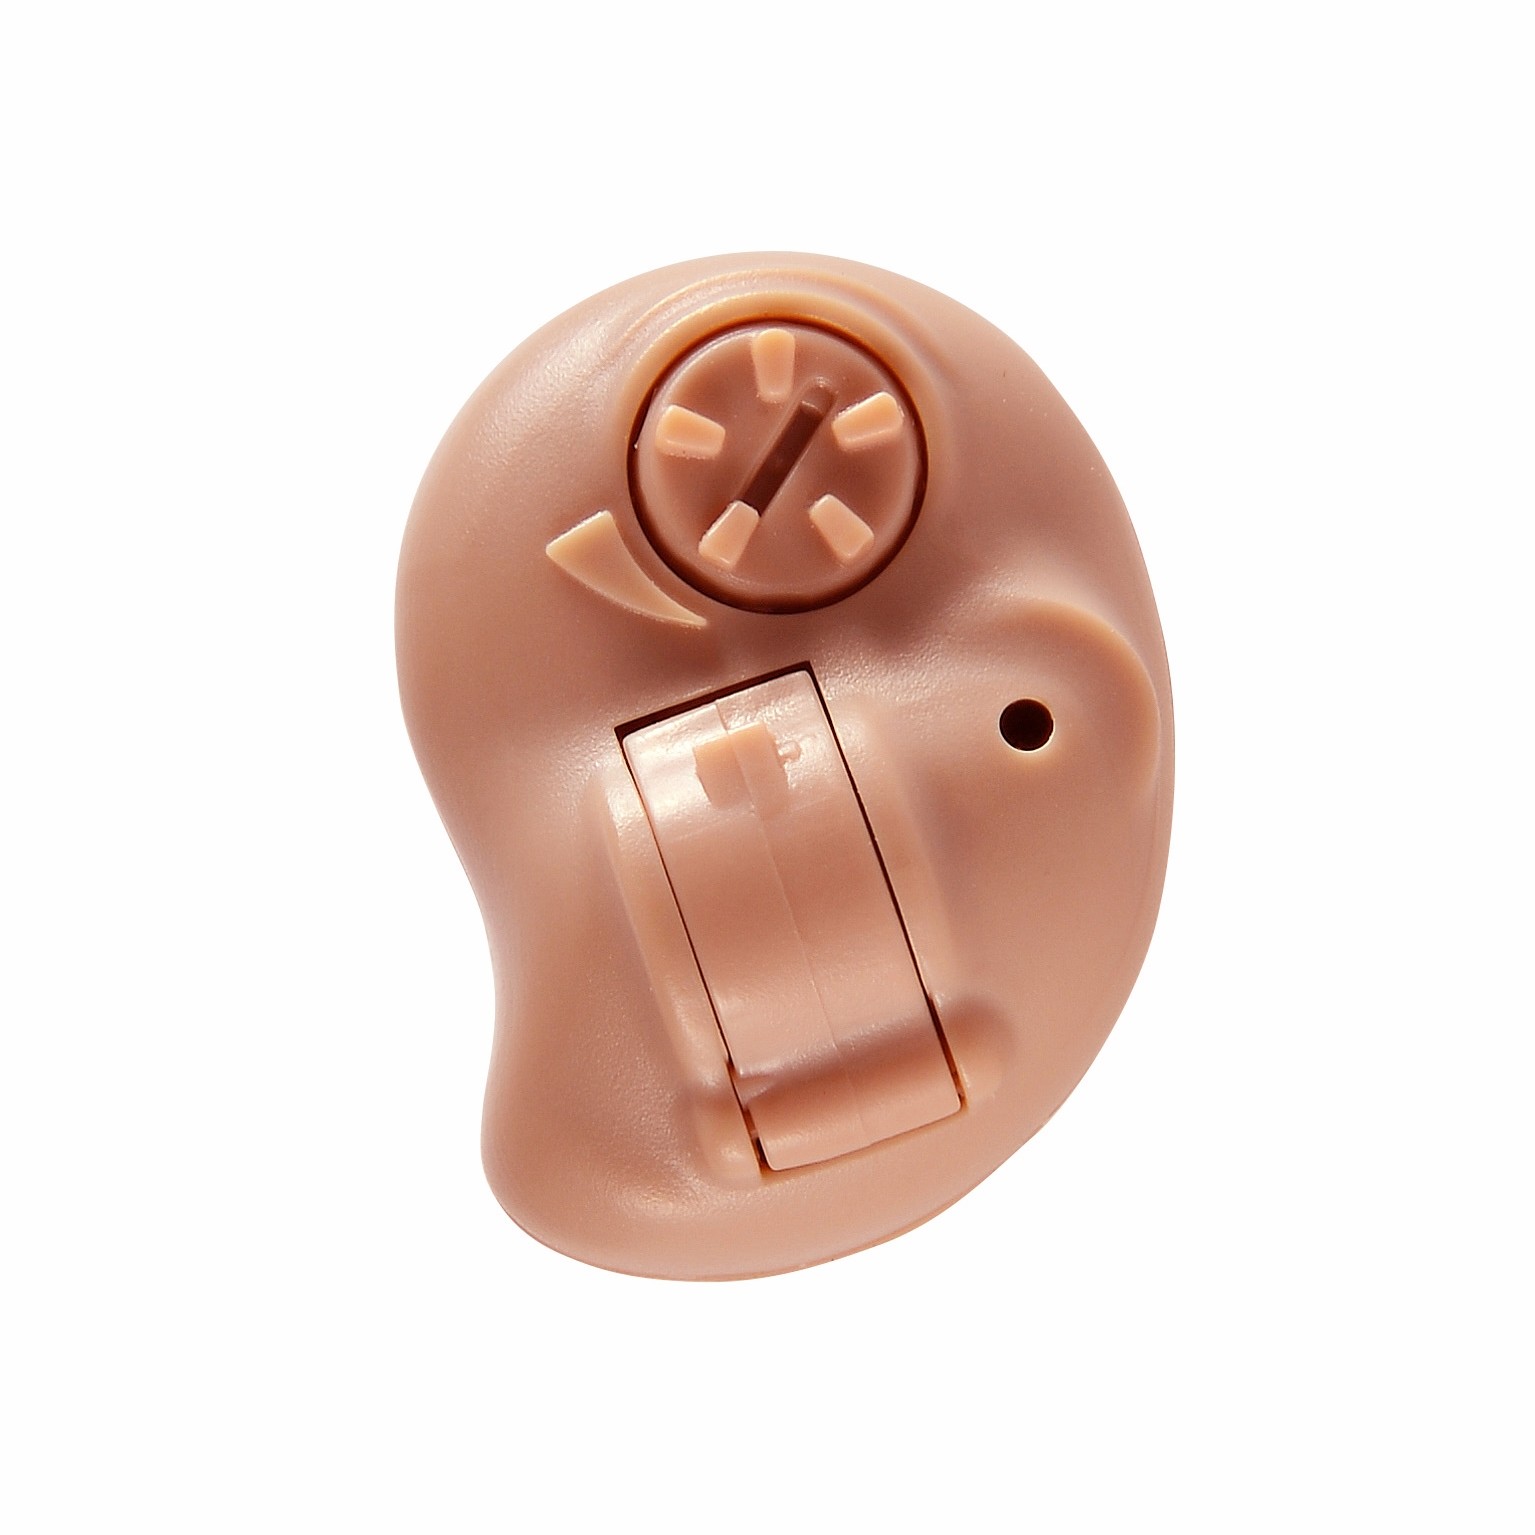 Small In Ears ITC Hearing Aids Advanced Digital Sound Amplifier Hearing Aid Device With 10A Battery